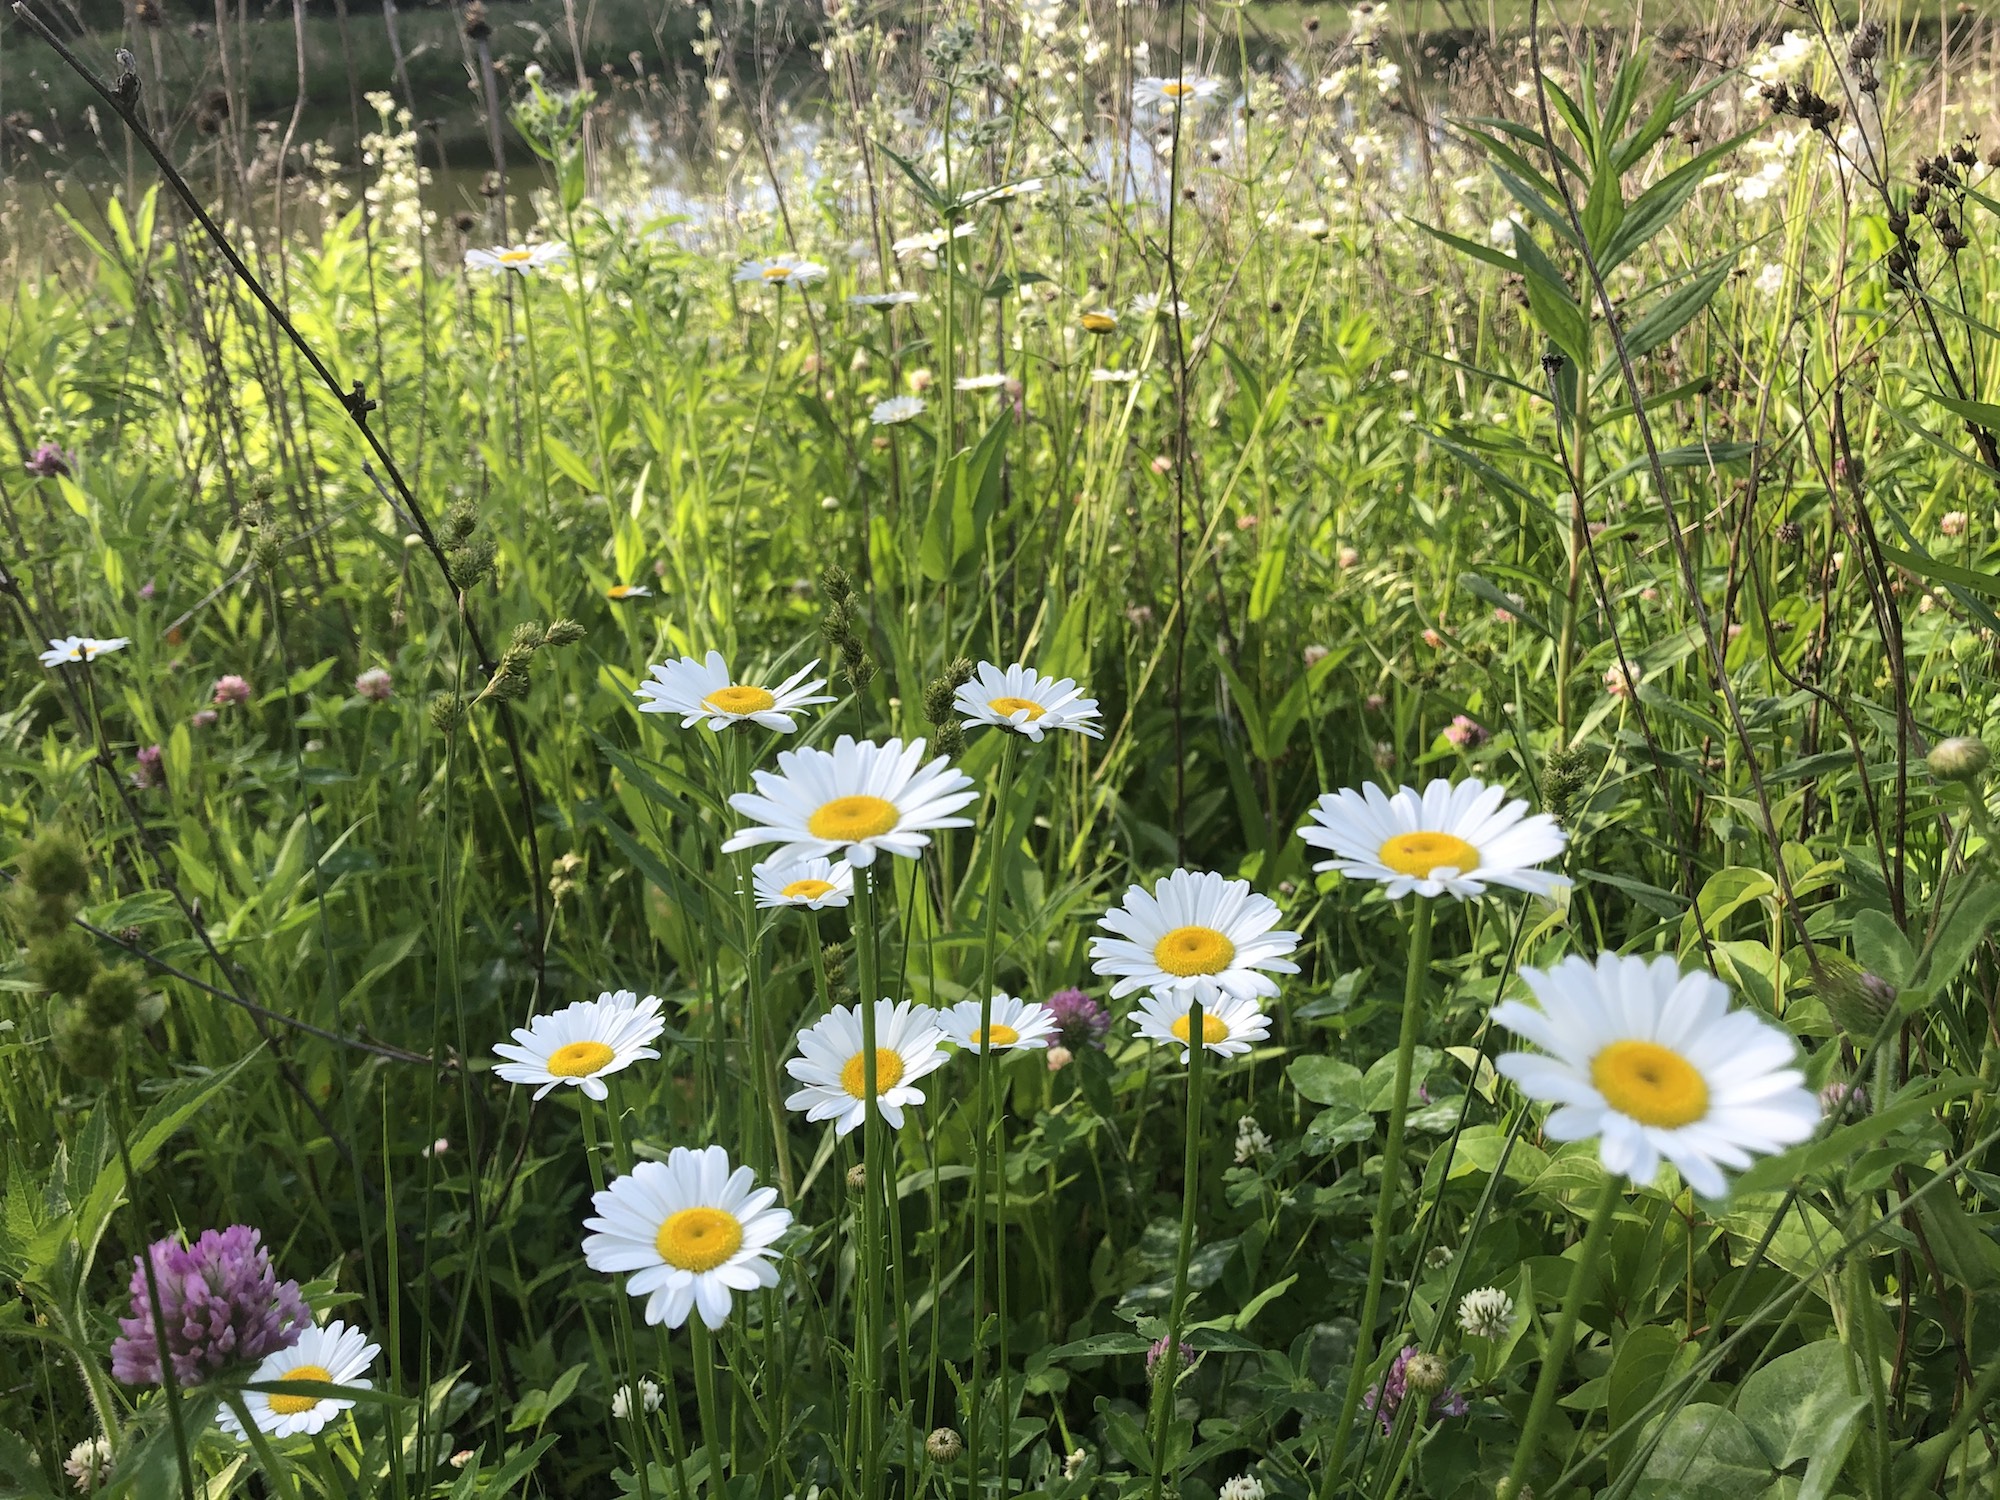 Ox-eye Daisies on bank of retaining pond in Madison, Wisconsin on June 8, 2020.